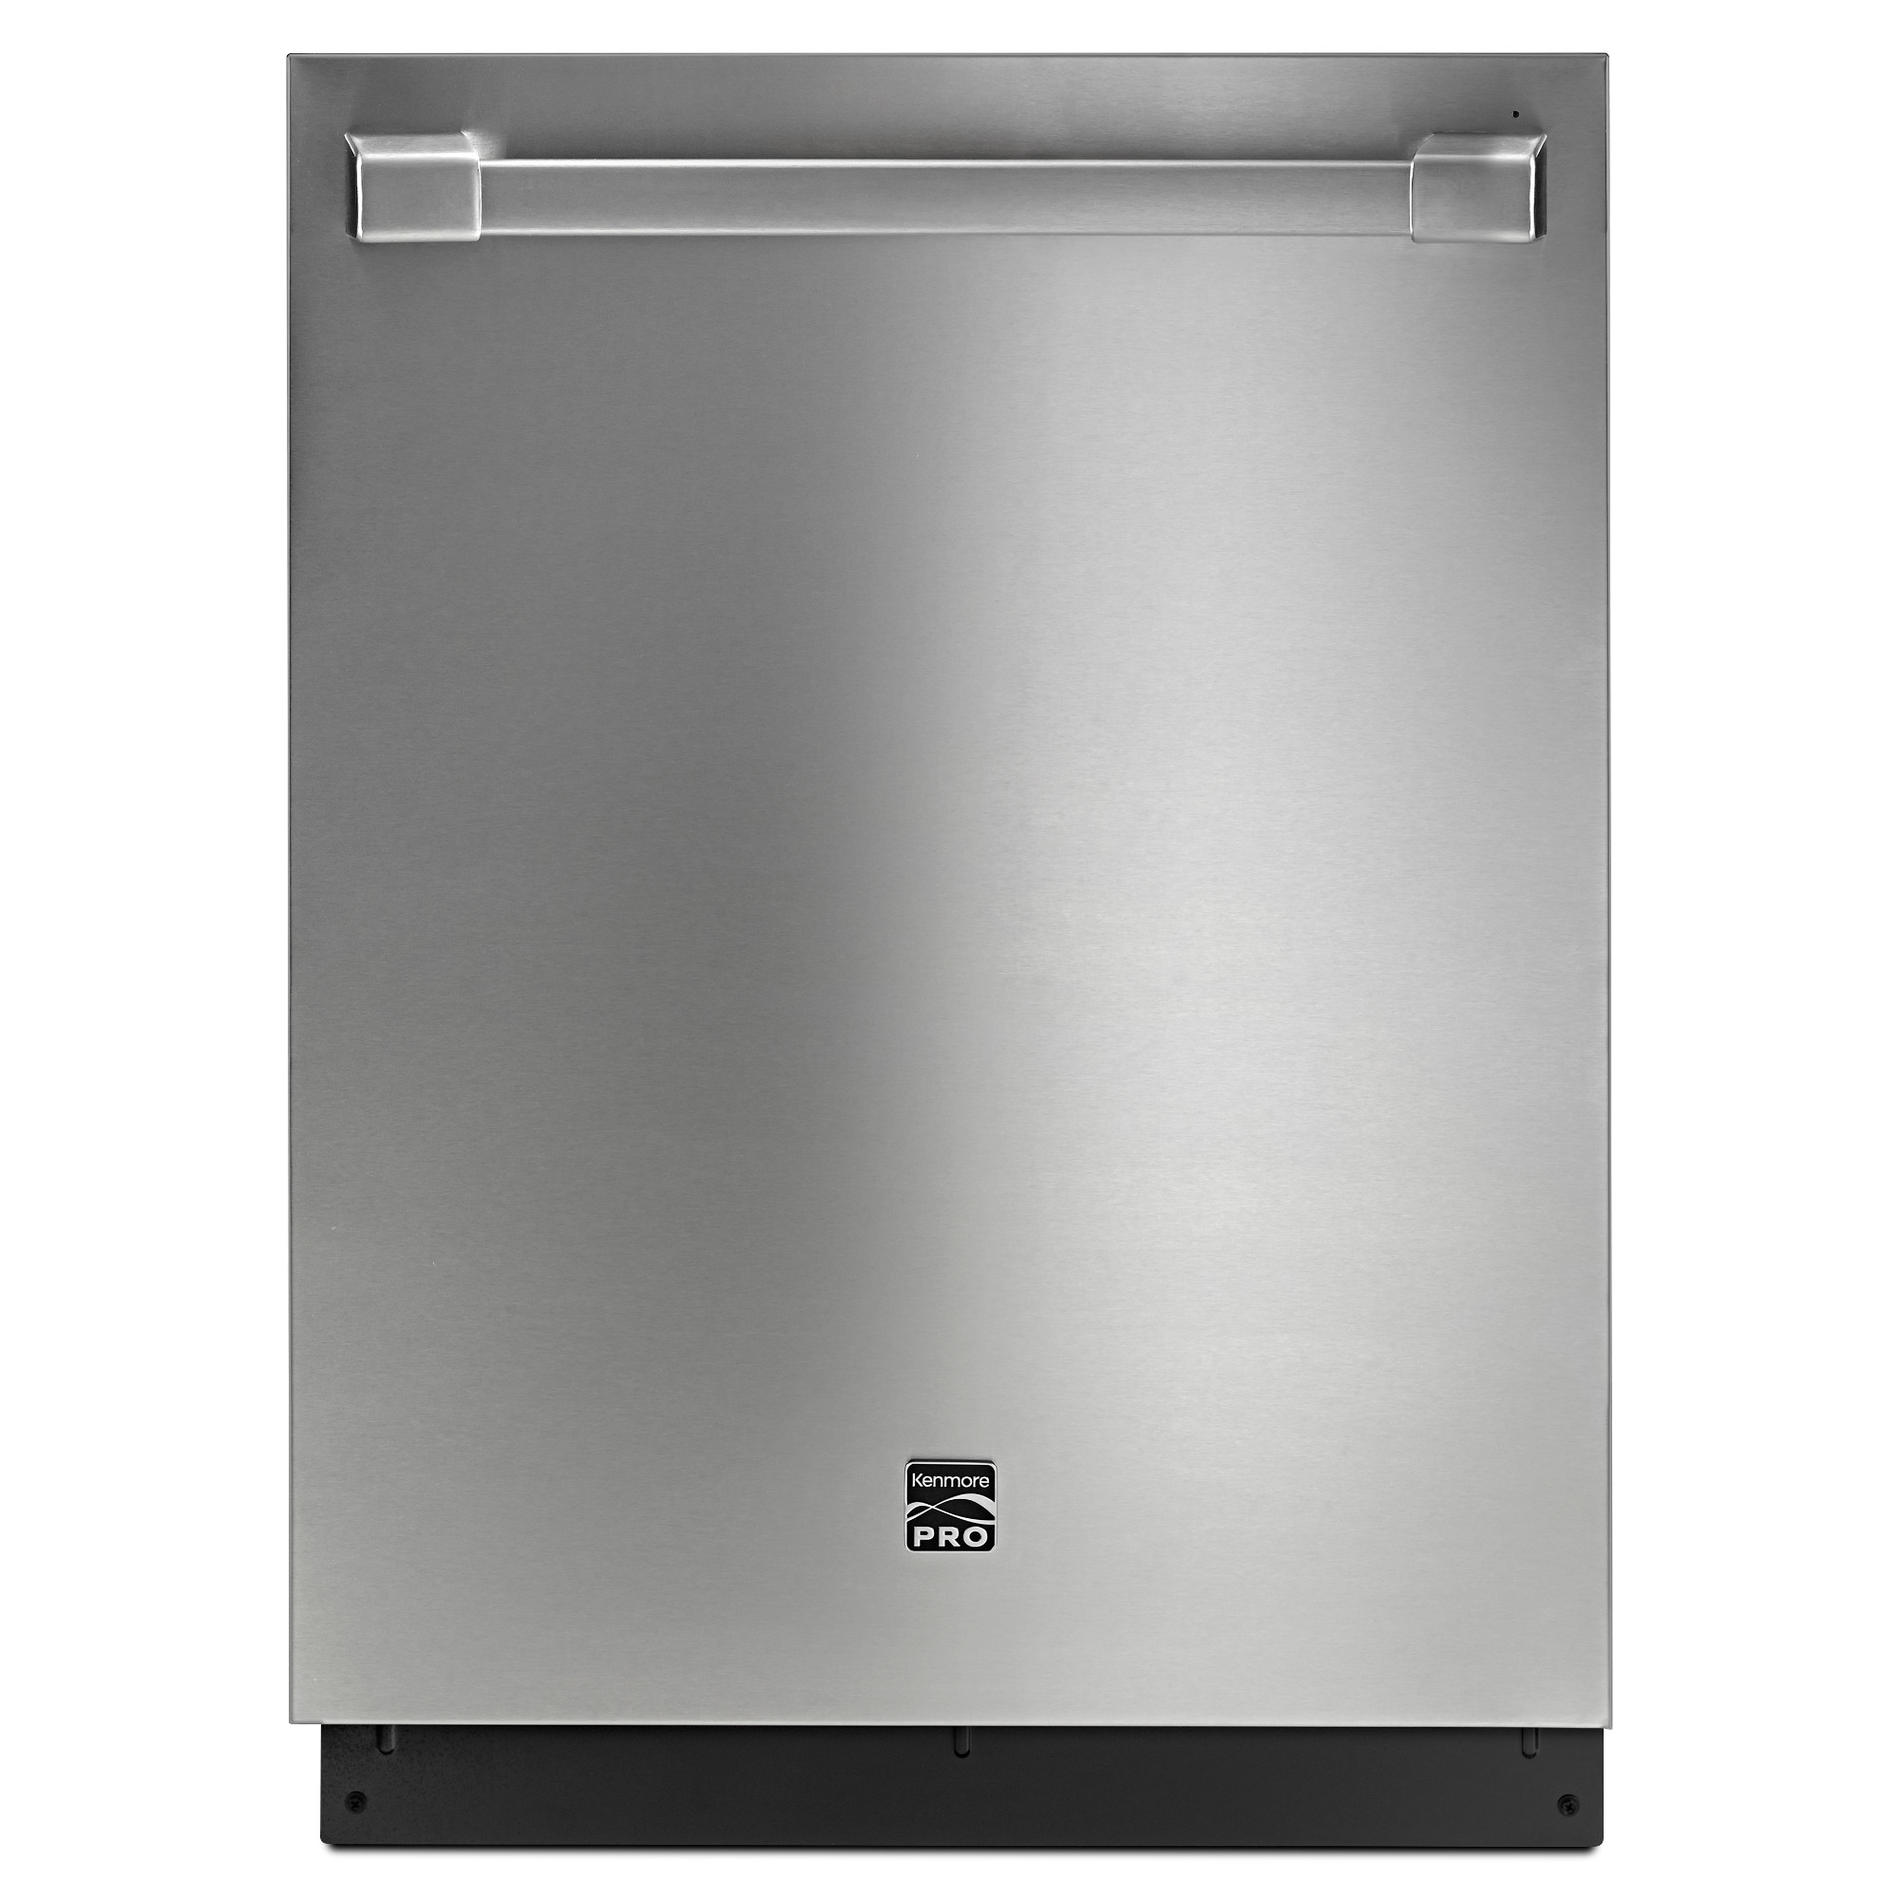 Kenmore Pro 14703 24 Built-In Dishwasher - Stainless Steel